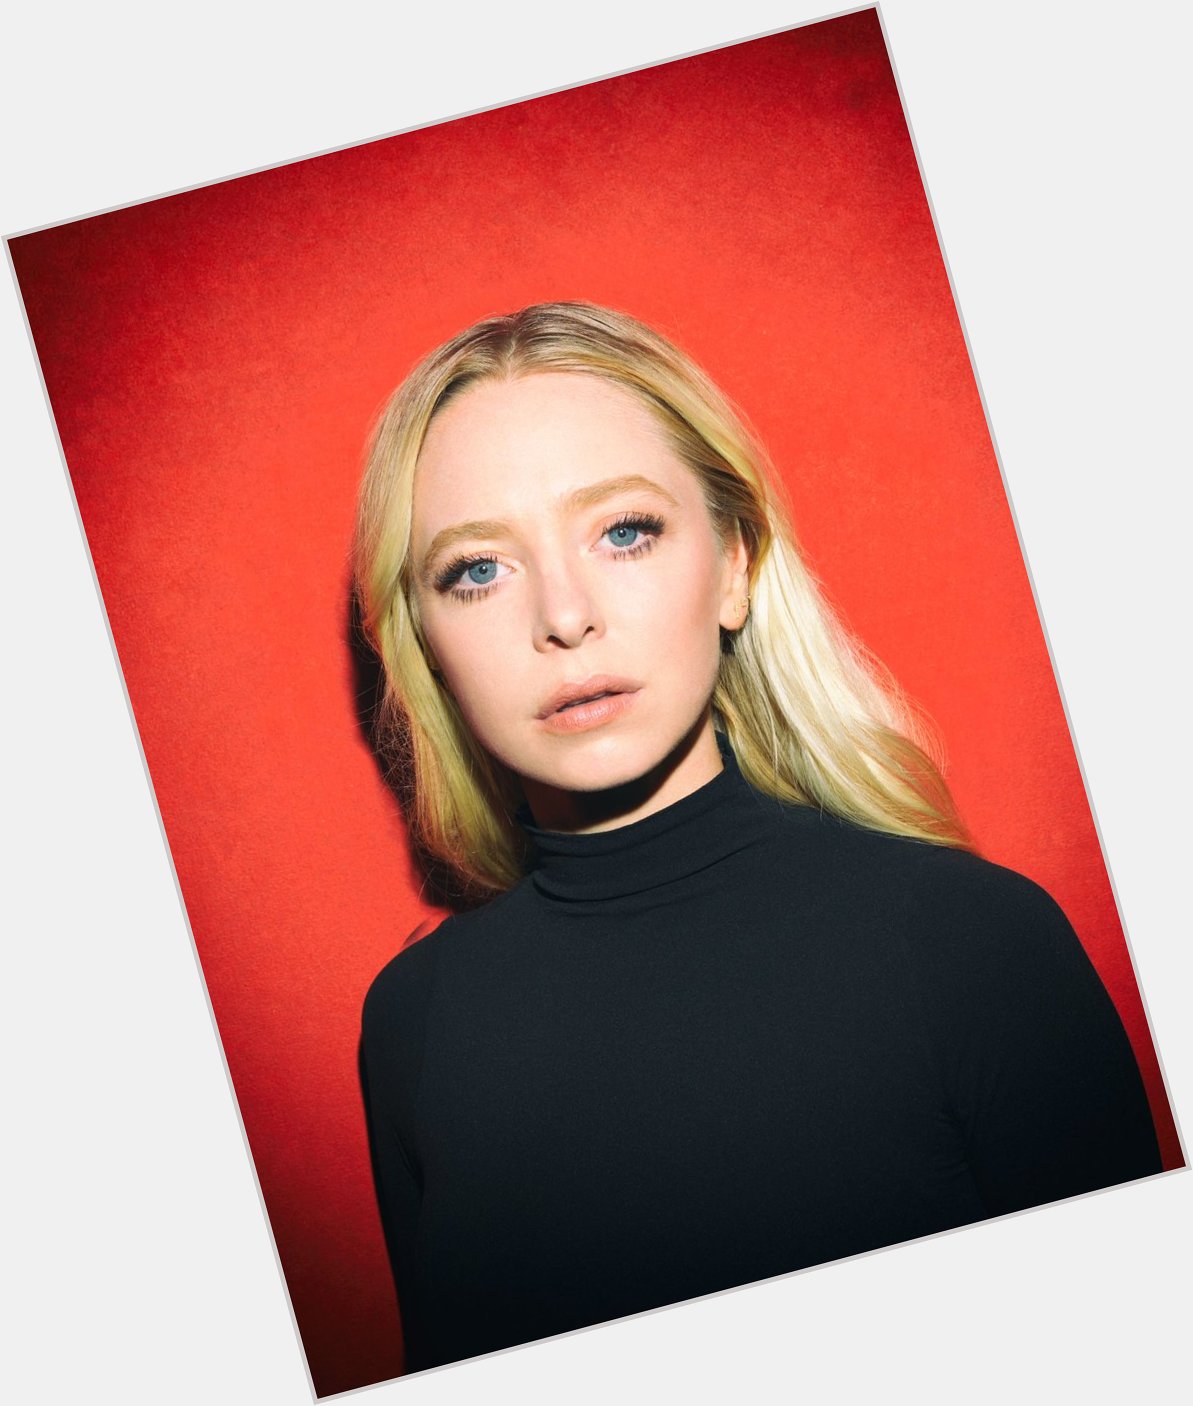 Happy birthday portia Doubleday I hope your day was special and beautiful 